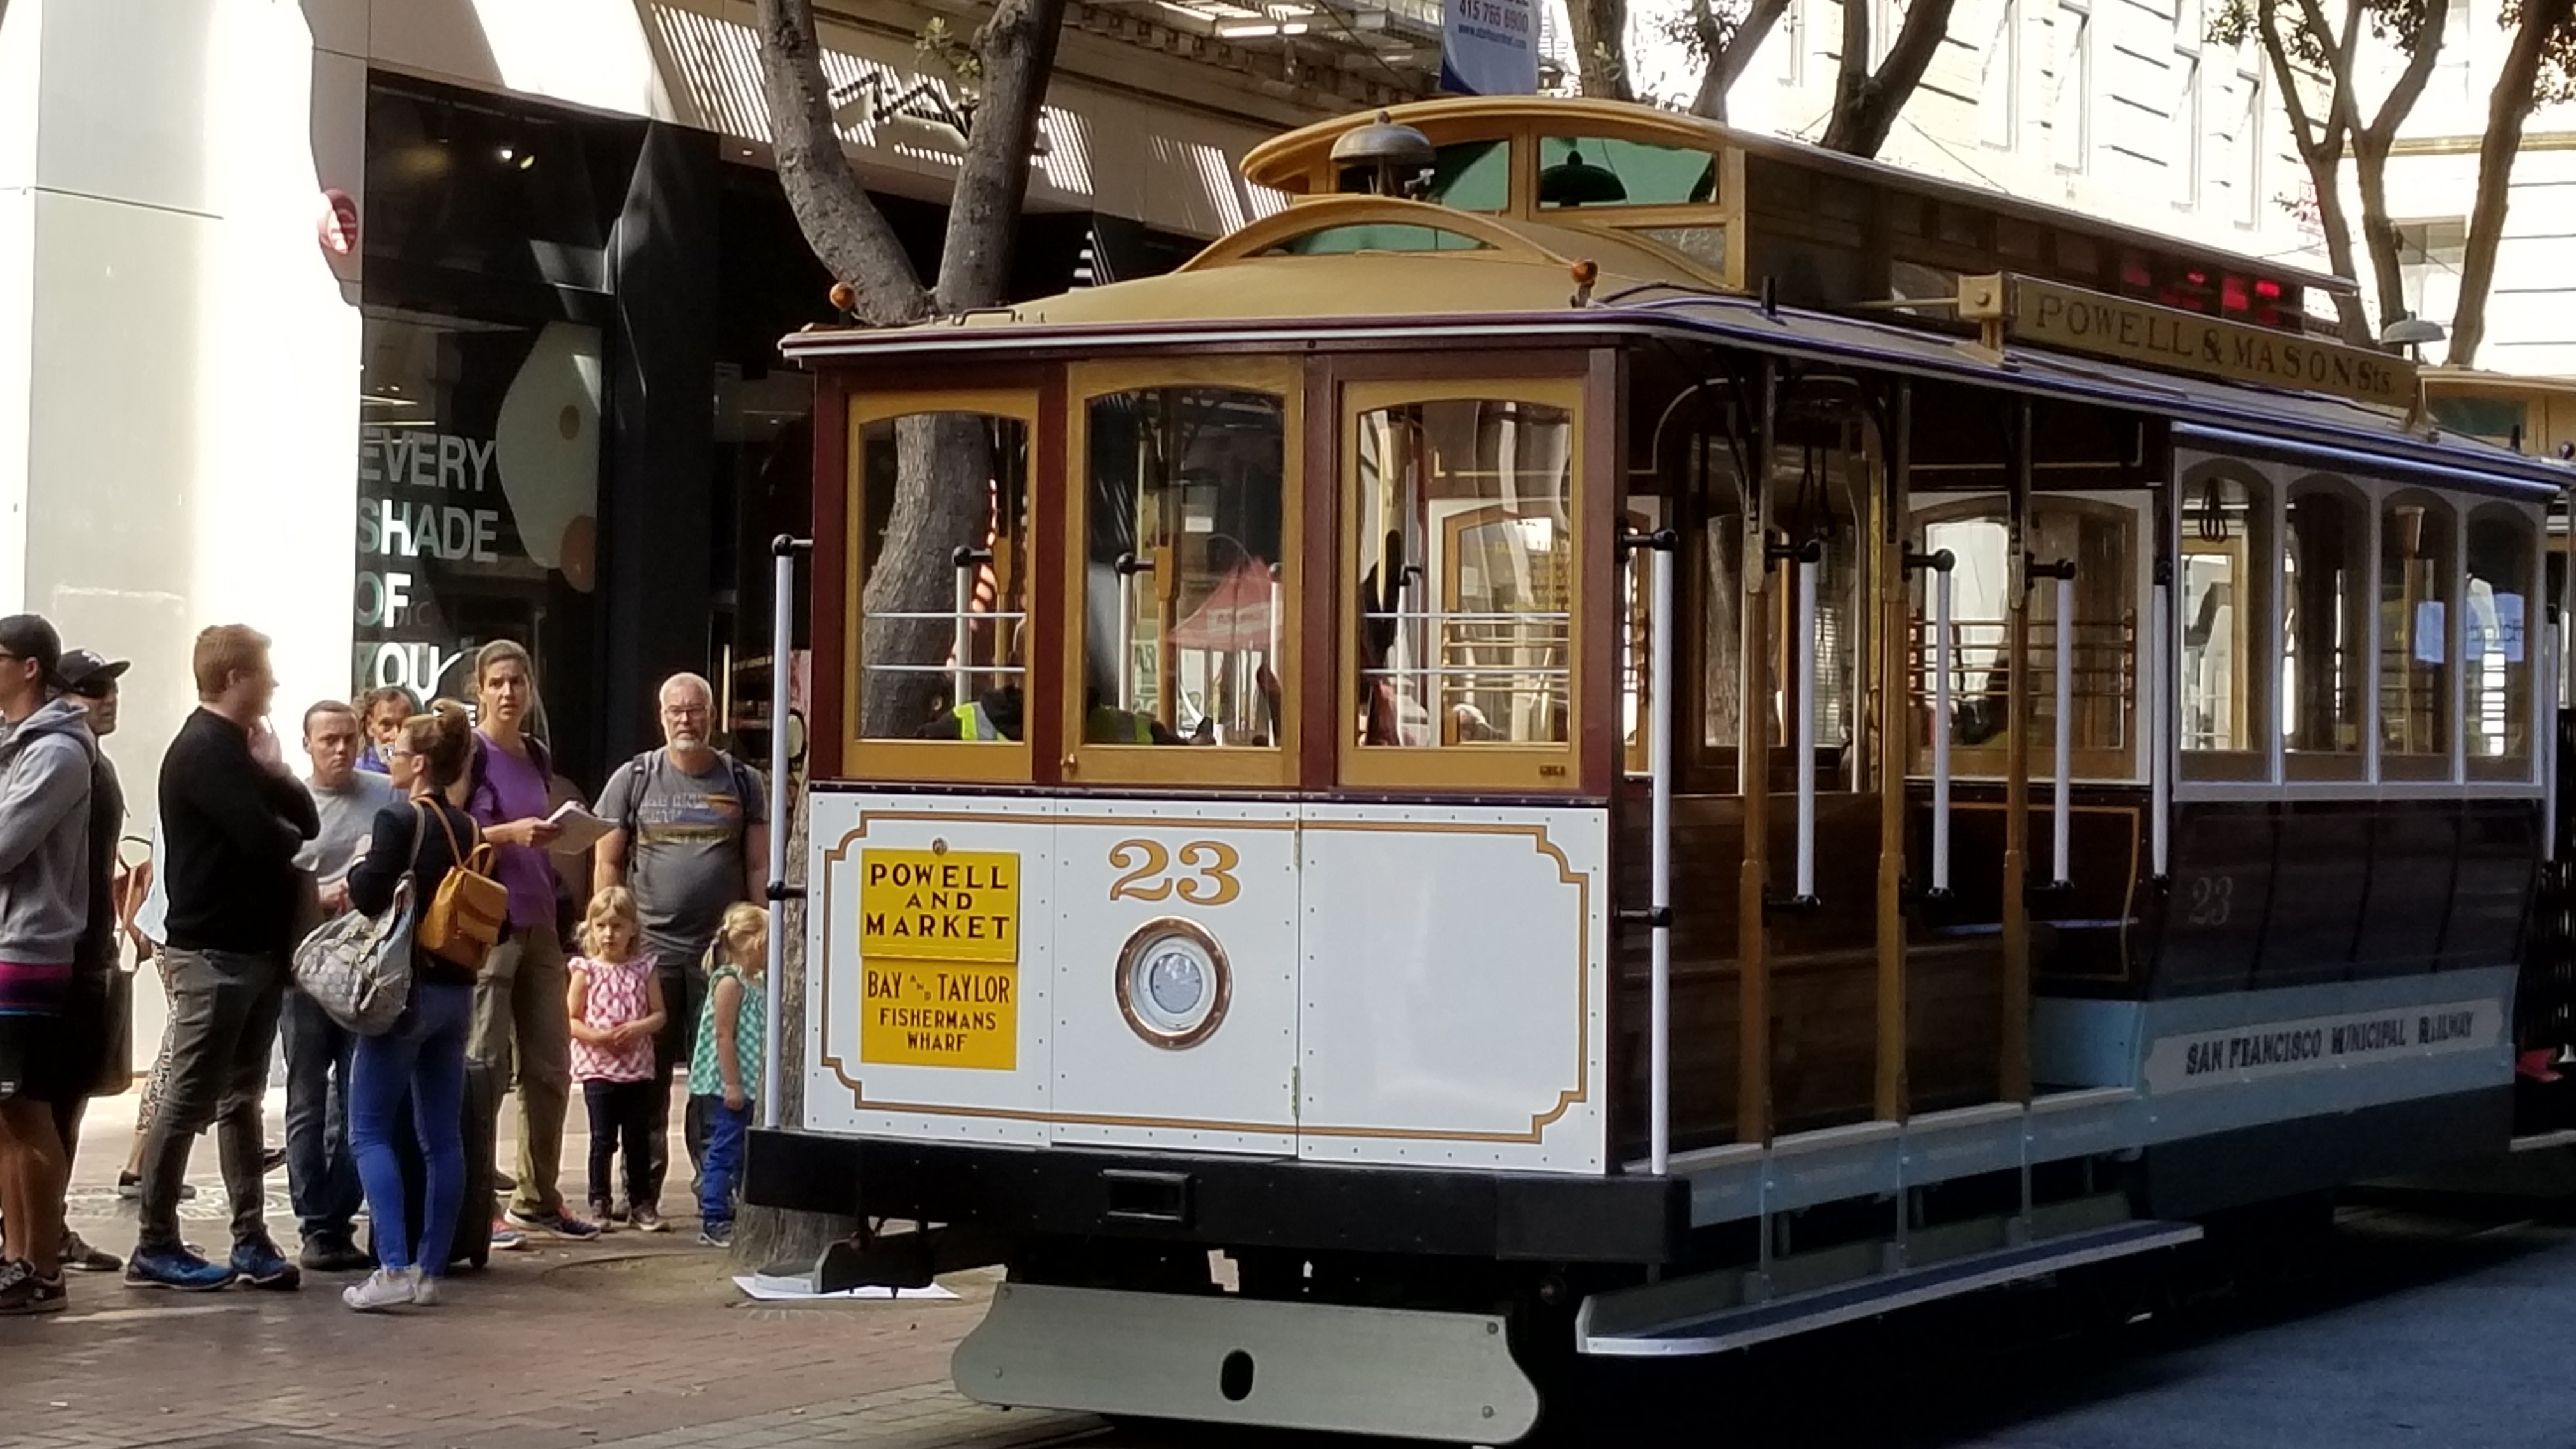 Tourists line up for the Powell and Market Street cablecar is one of San Francisco's best known attractions.